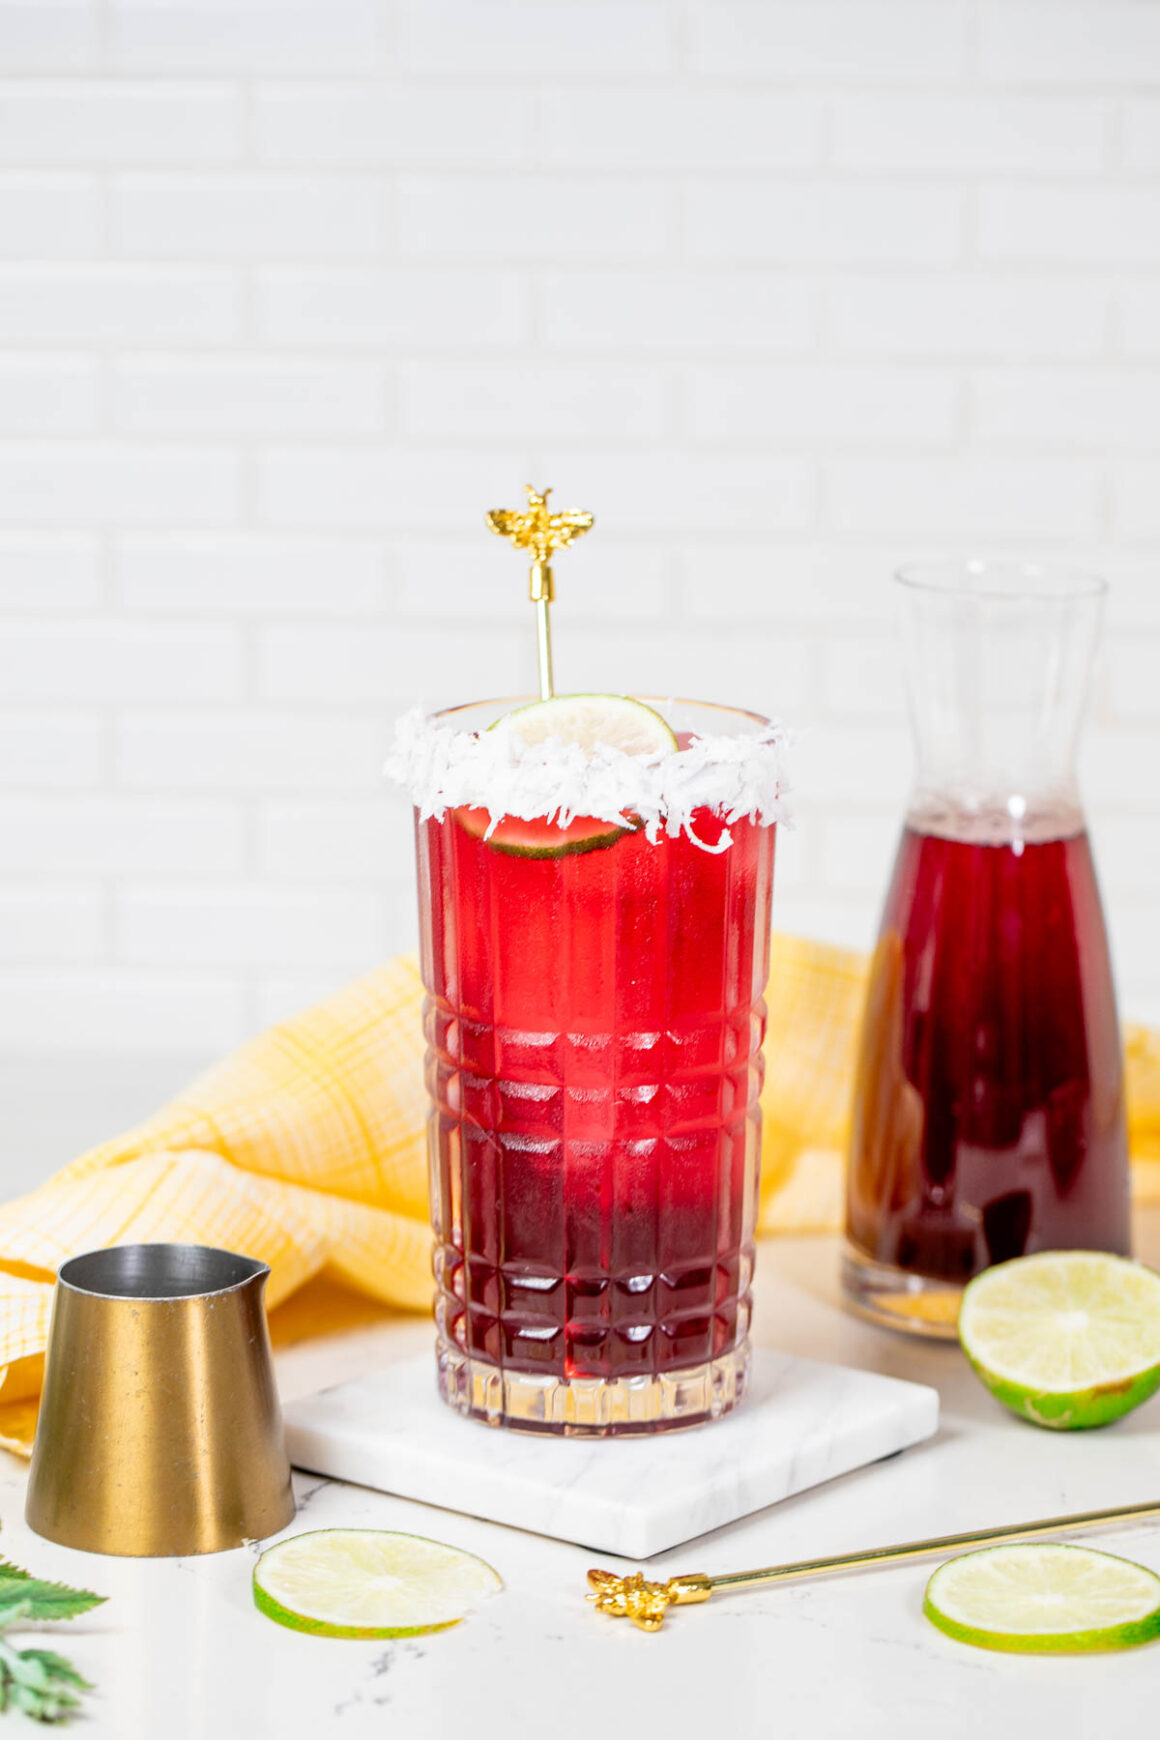 beet recipe served into a tall glass rim it with shredded coconut as a garnish